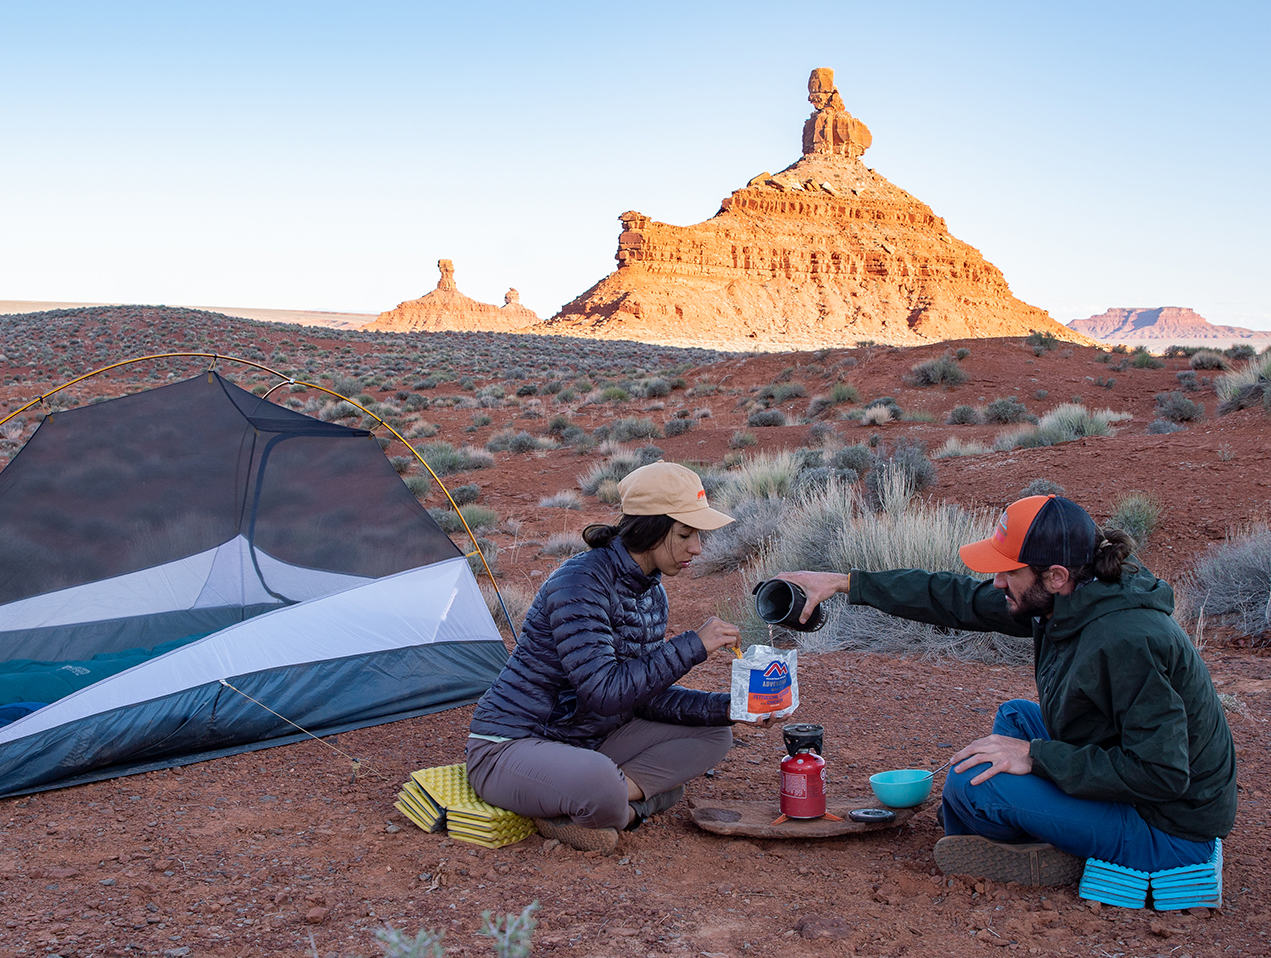 Making dinner at camp while backpacking in the Utah desert